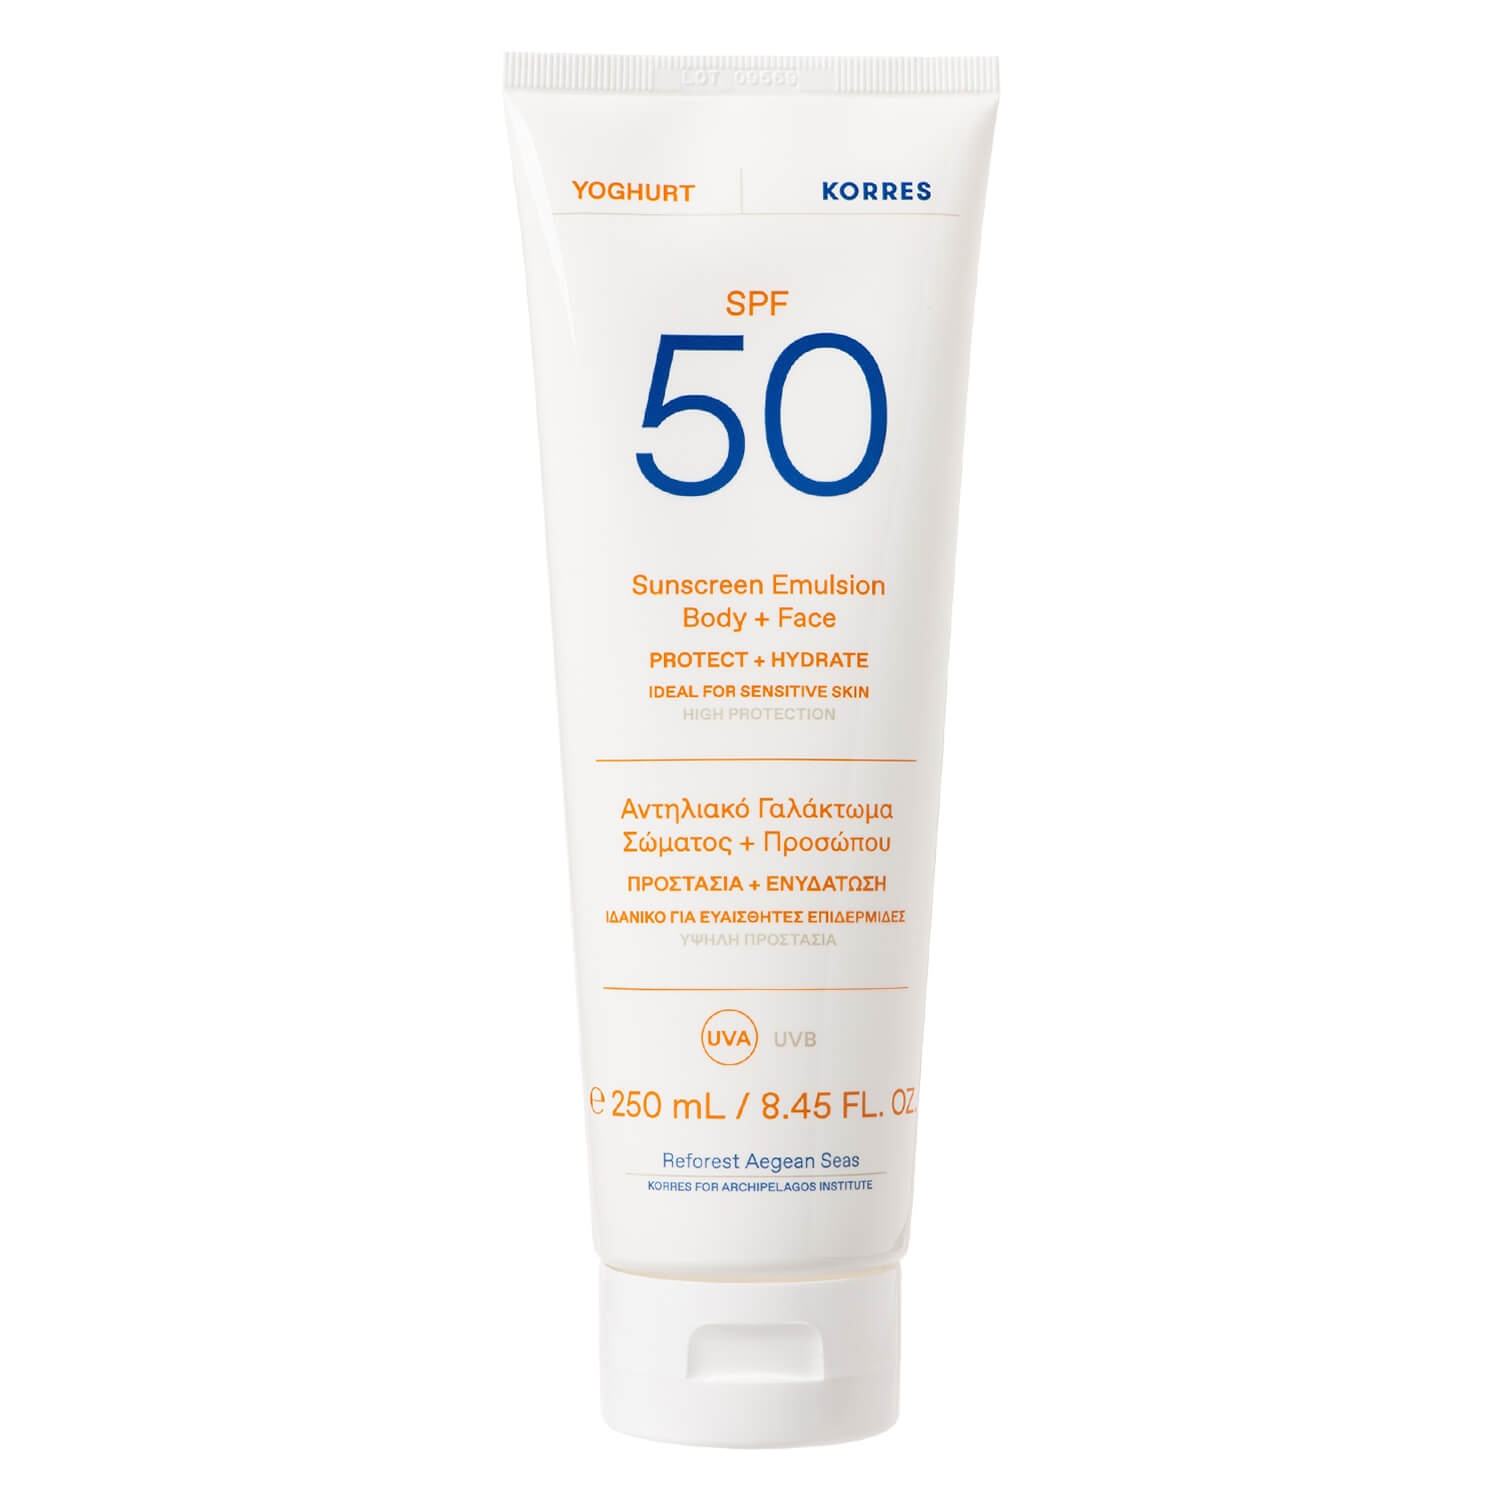 Product image from Korres Care - Yoghurt Sunscreen Emulsion Body + Face SPF50